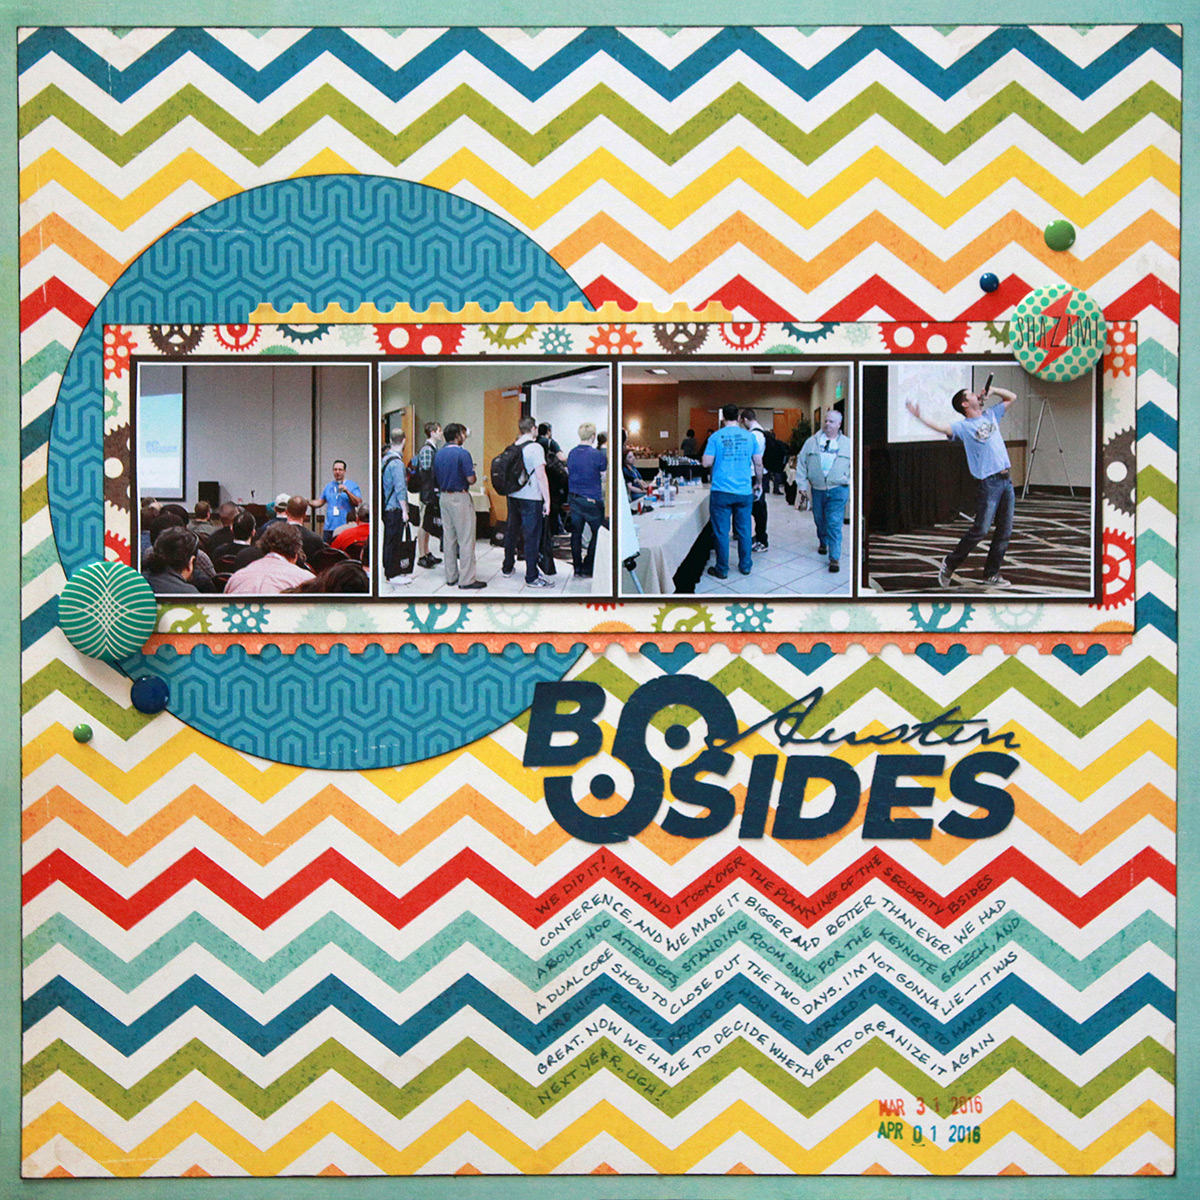 BSides Austin is a 4-photo scrapbook layout based on the June 15, 2016 sketch from Stuck?! Sketches.